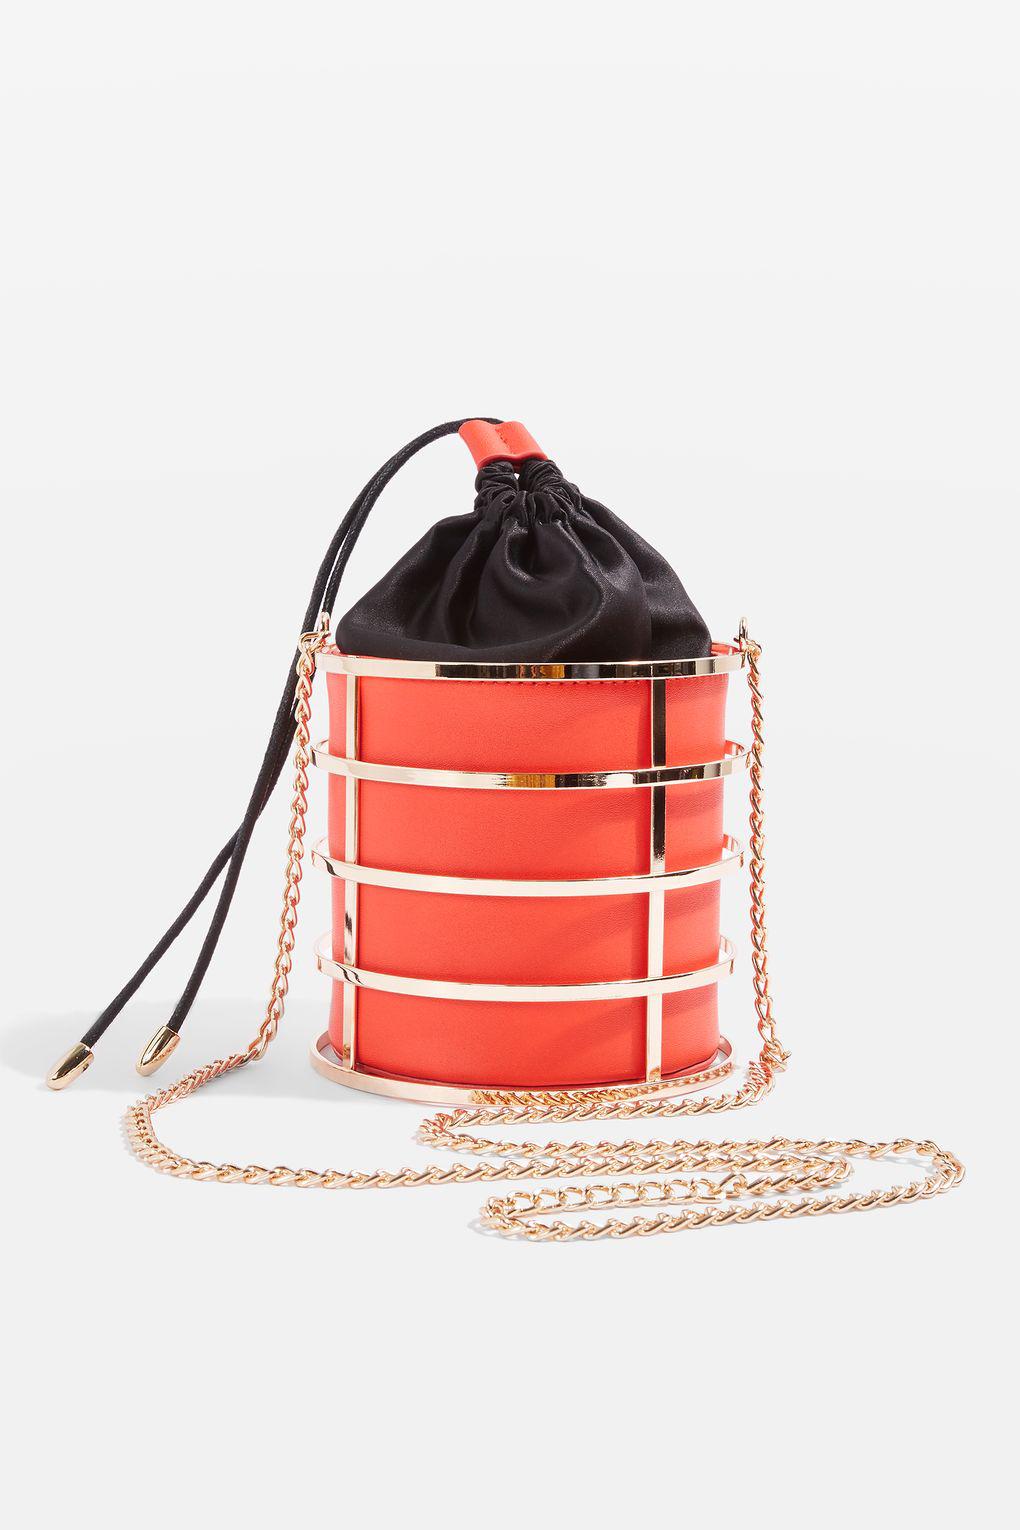 TOPSHOP Randy Round Crossbody Bag in Red - Lyst